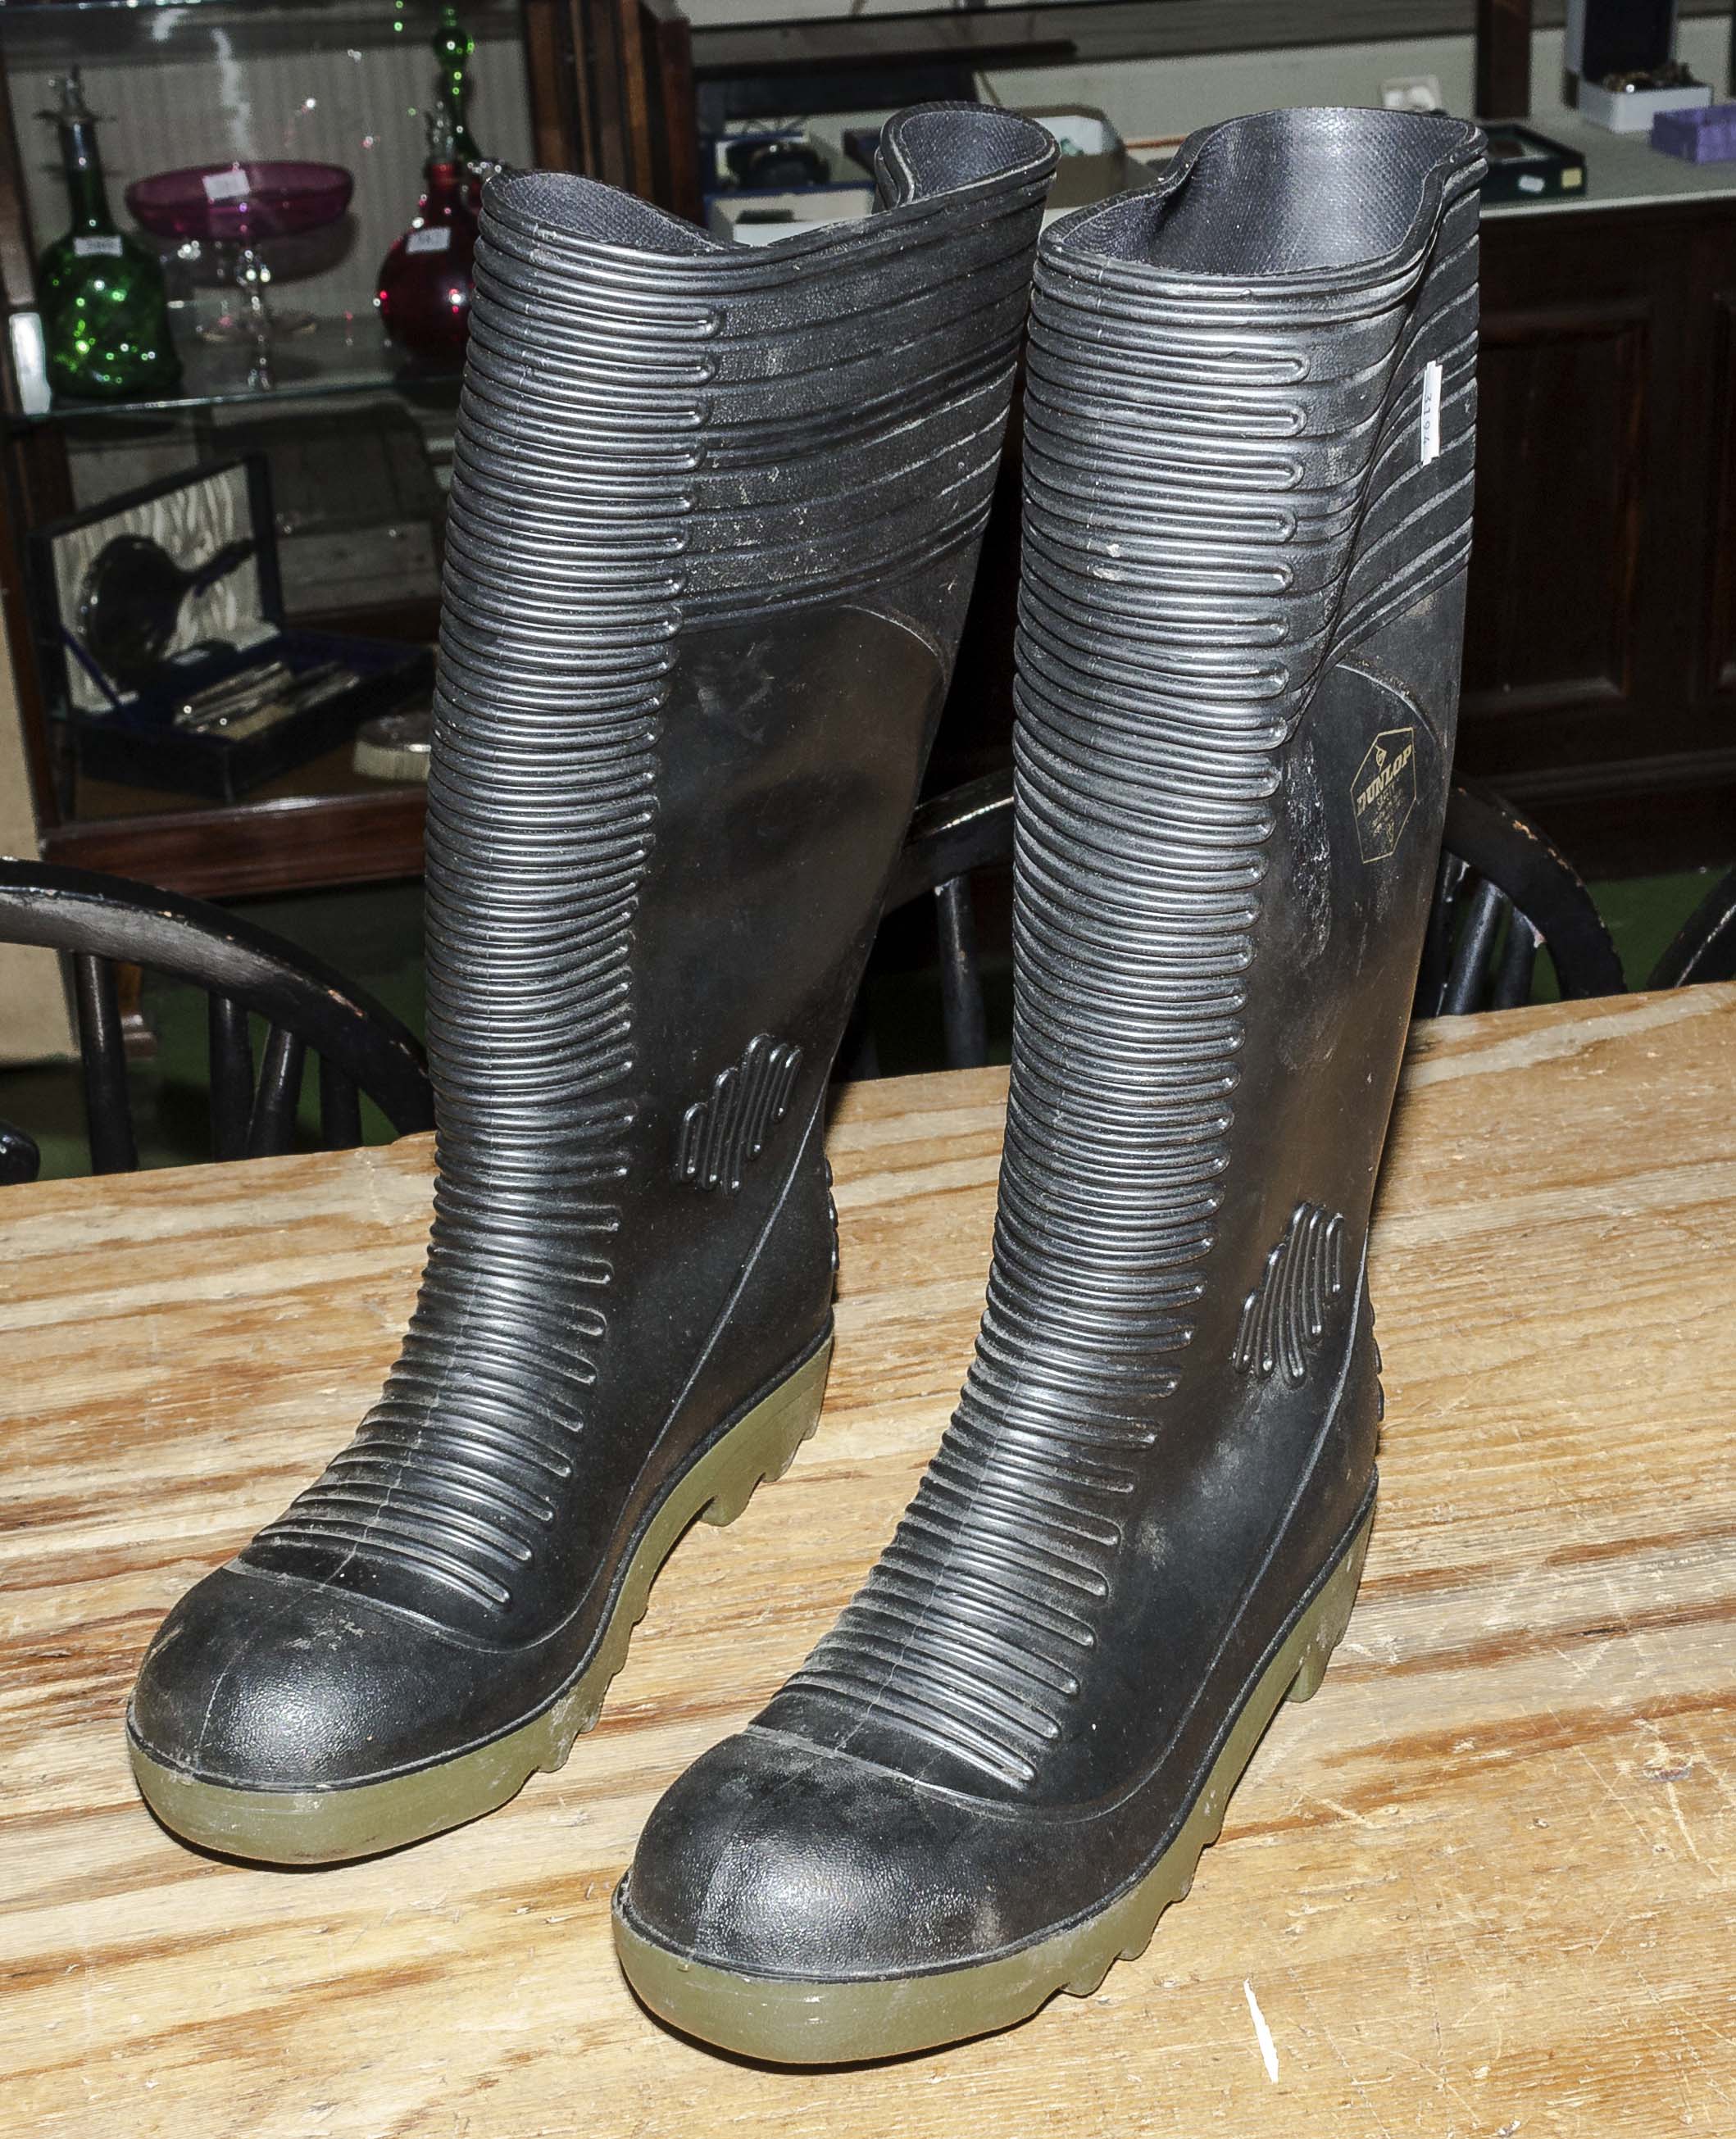 A pair of wellington boots